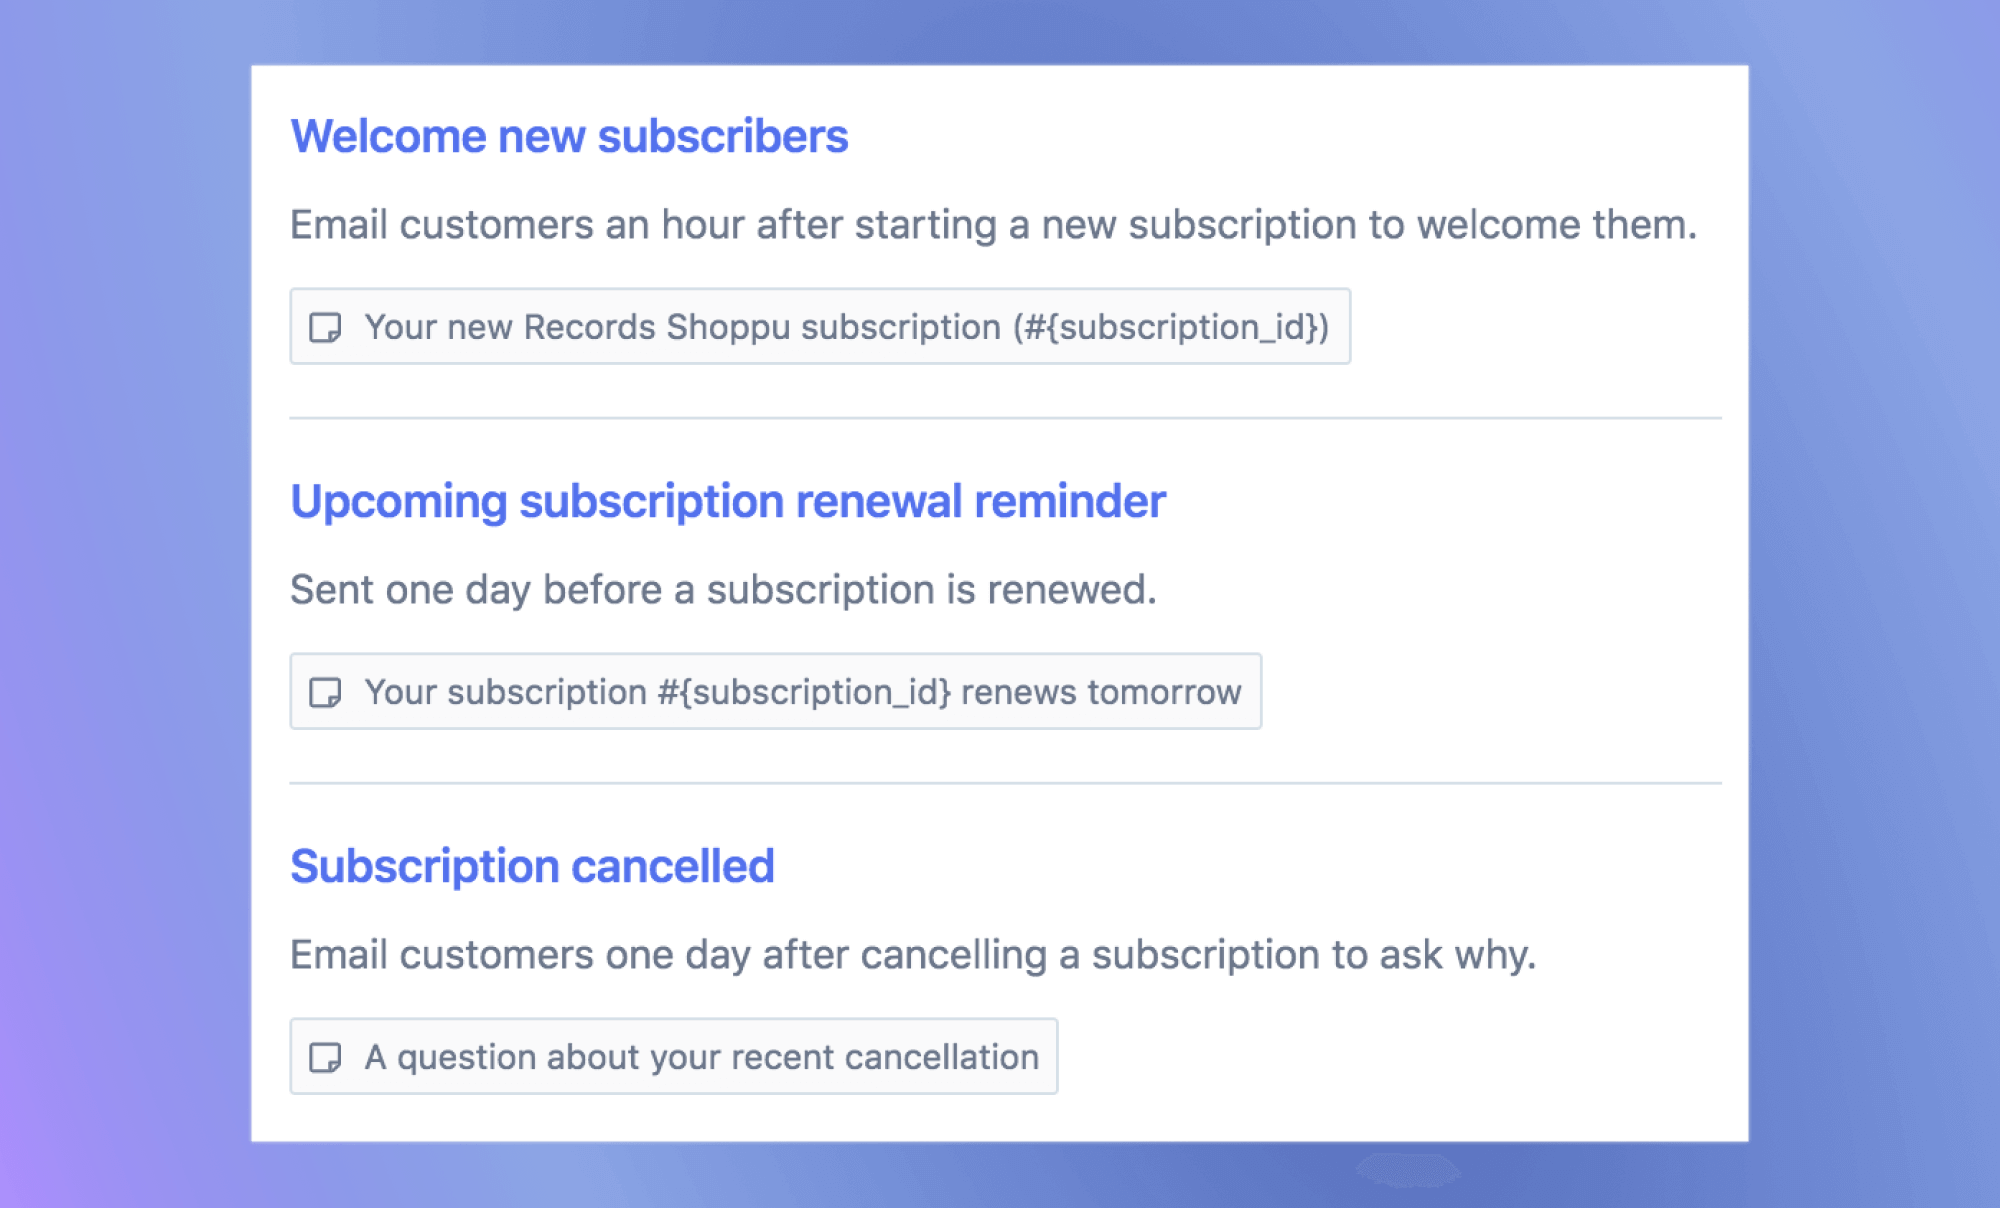 Use Metorik Engage to send automated subscription emails